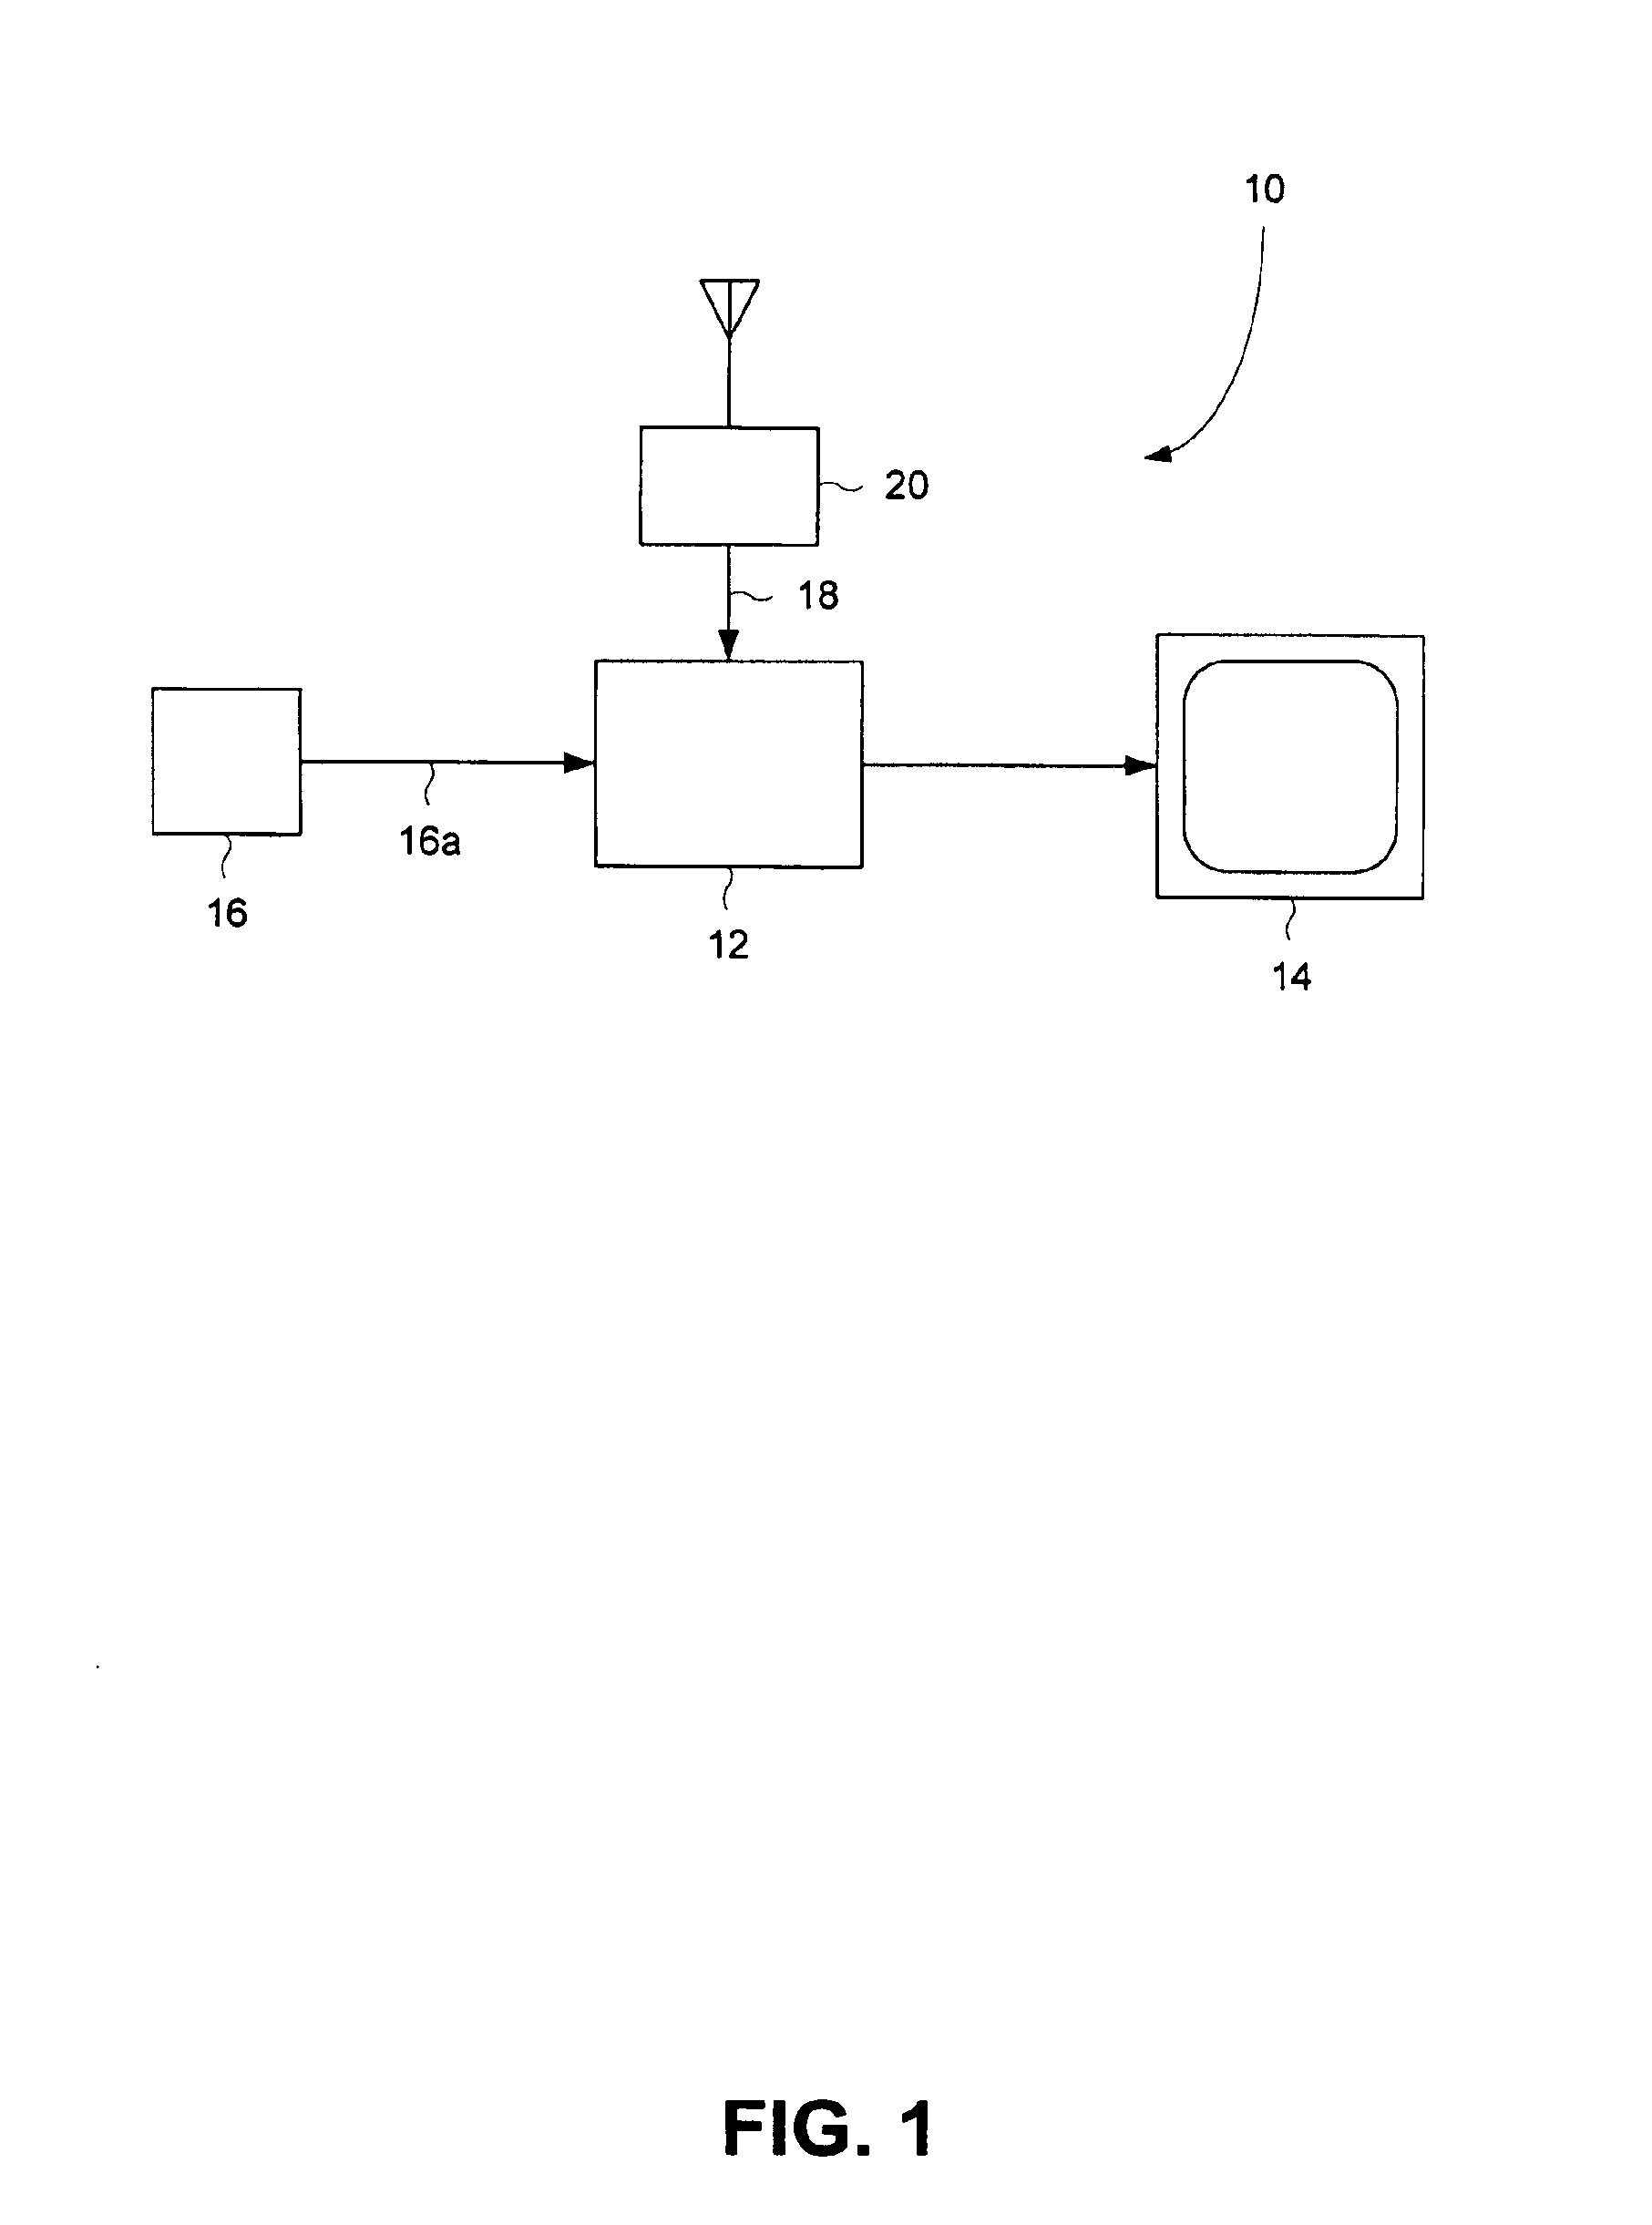 Graphical symbology for depicting traffic position, navigation uncertainty, and data quality on aircraft displays